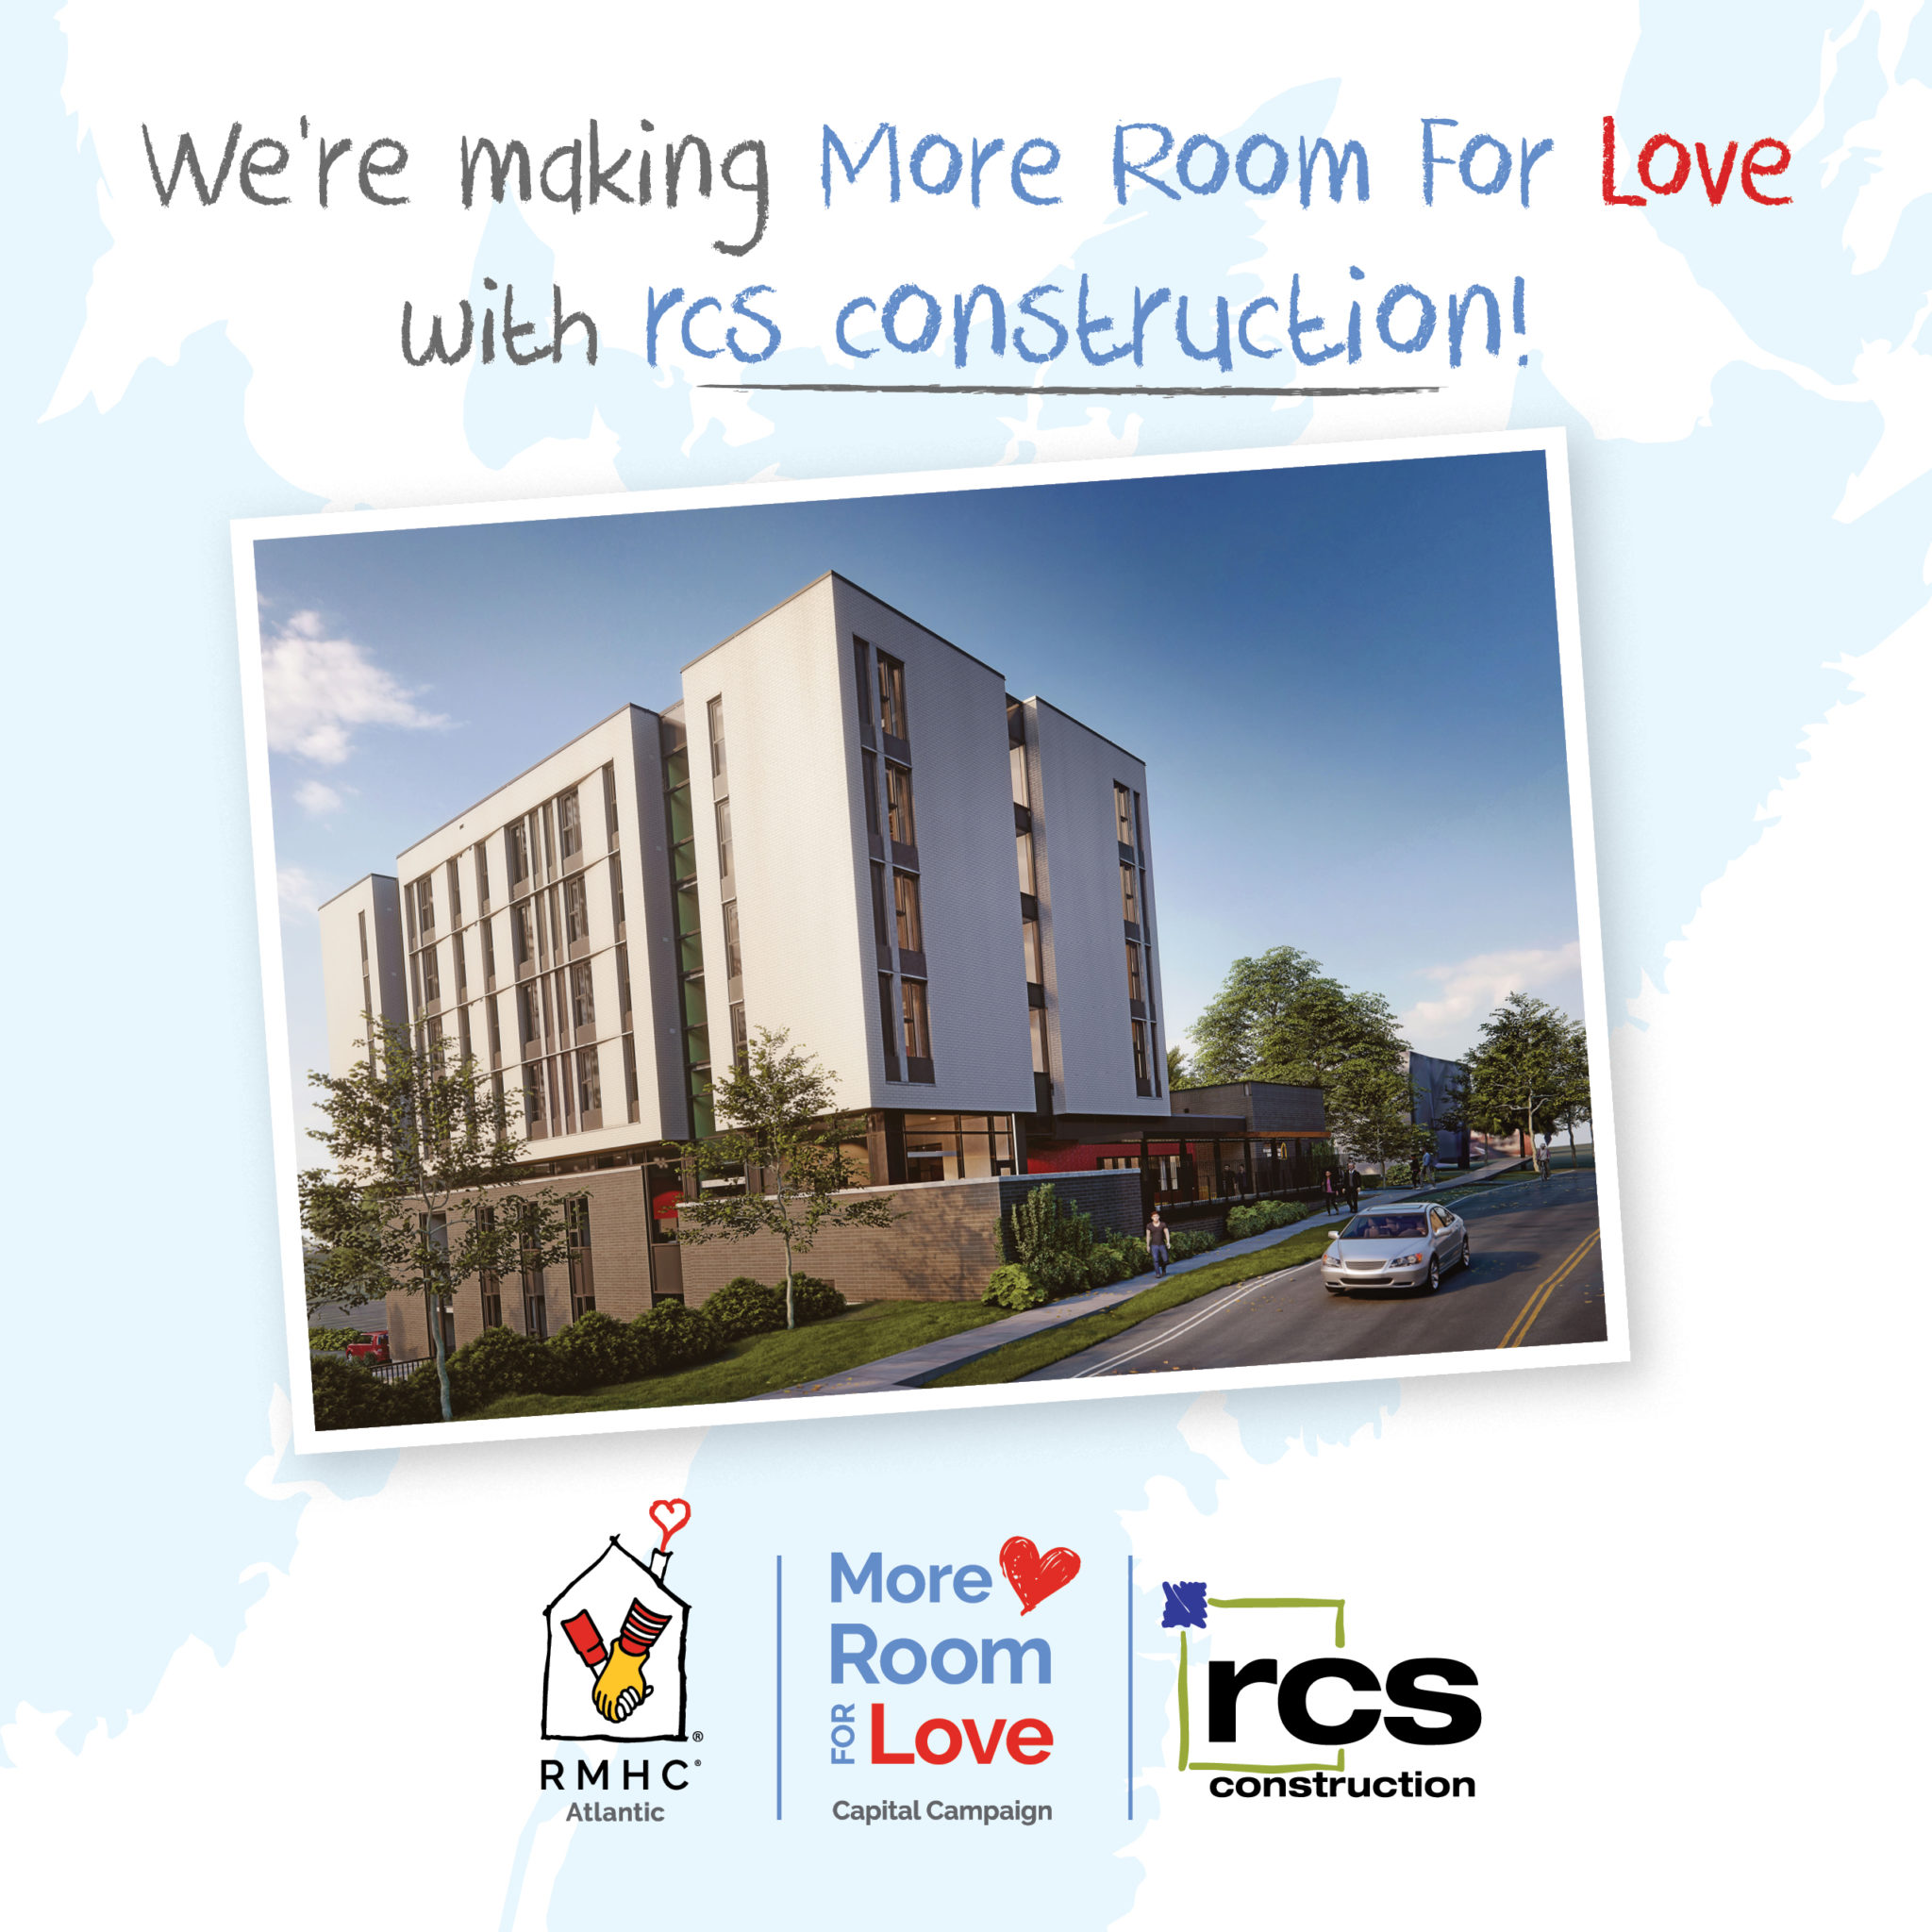 Announcement - we're making More Room For Love